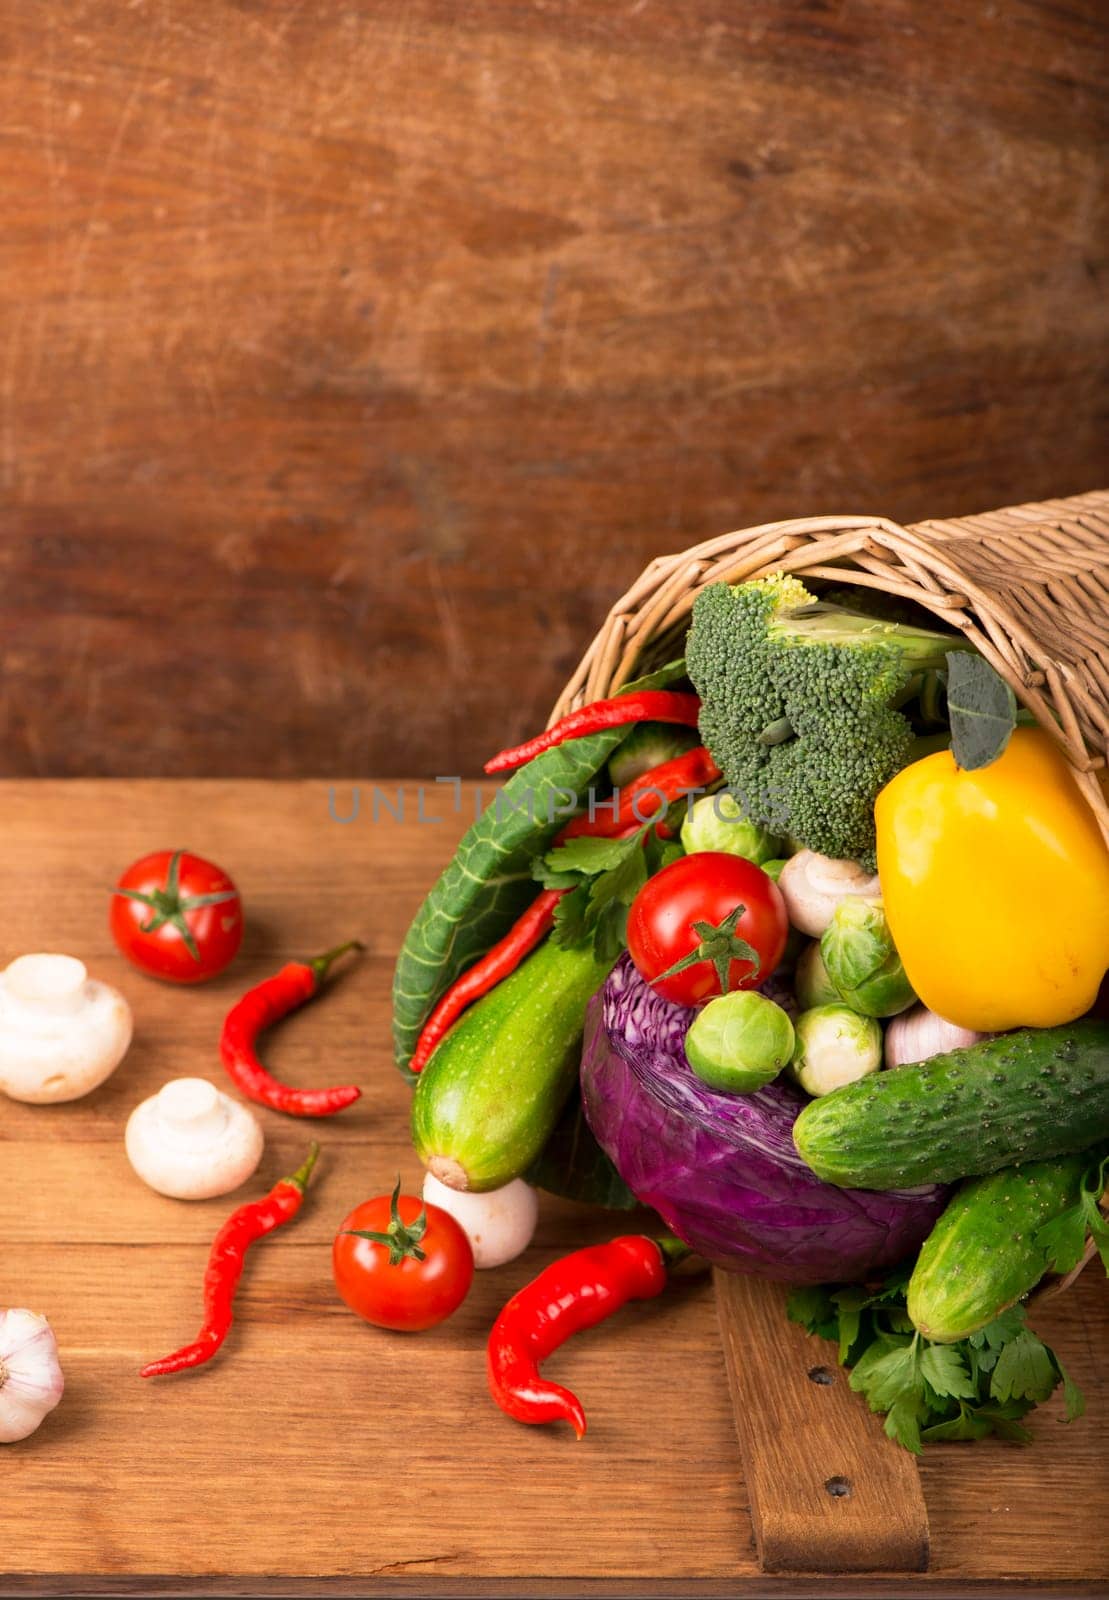 Top view of vegetables on wooden table and wicker basket, carrots velery tomatoes cabbage broccoli, copy space, selective focus by aprilphoto